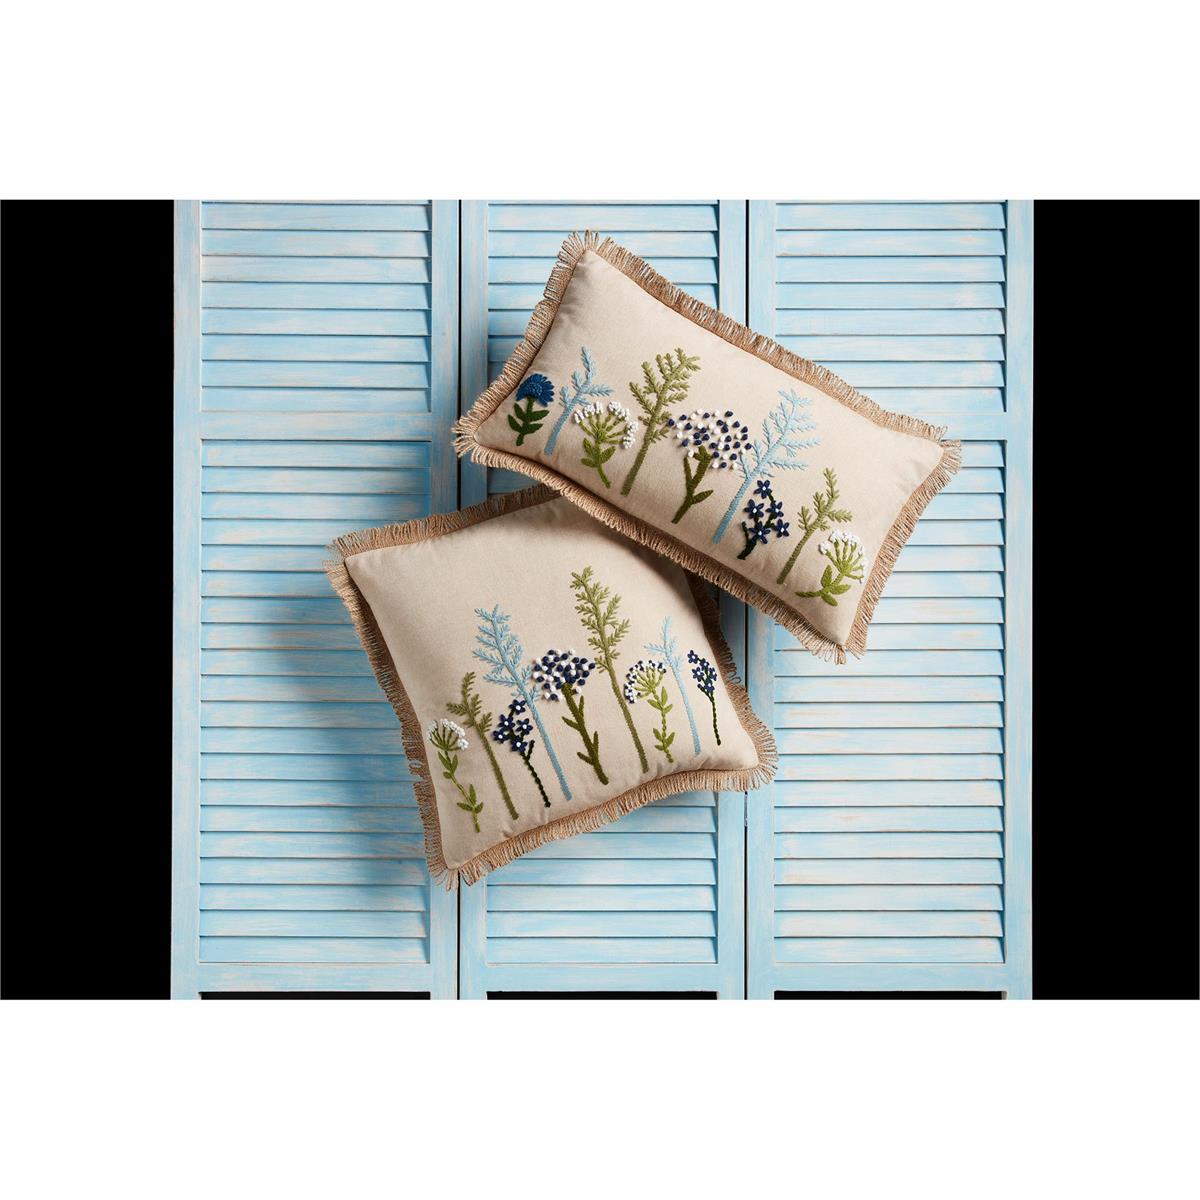 View Mud Pie - Blue Floral Embroidery Pillow - Square